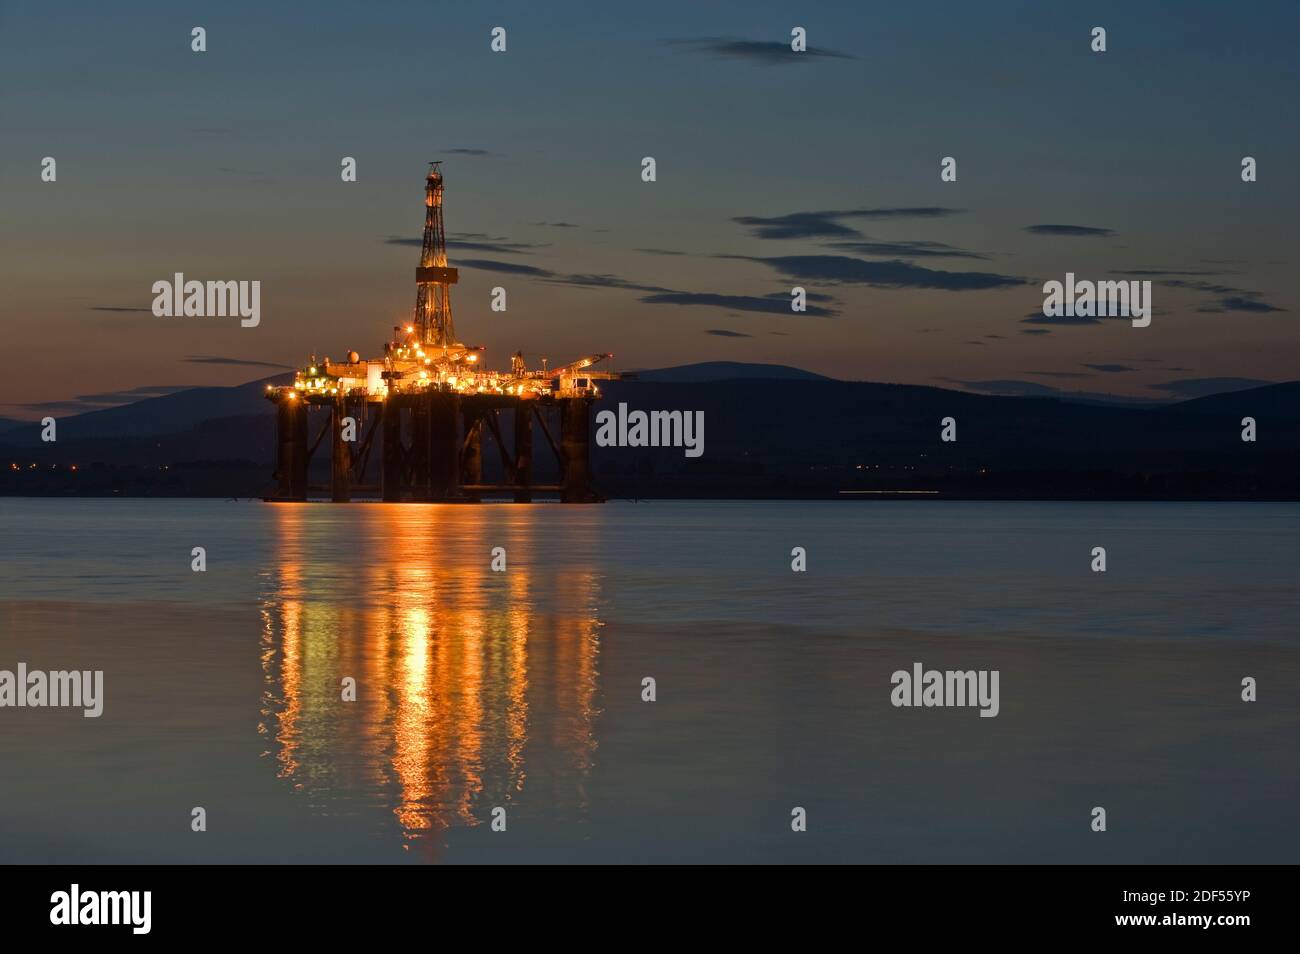 Oil drilling platforms moored in Cromarty Firth, Scotland Stock Photo